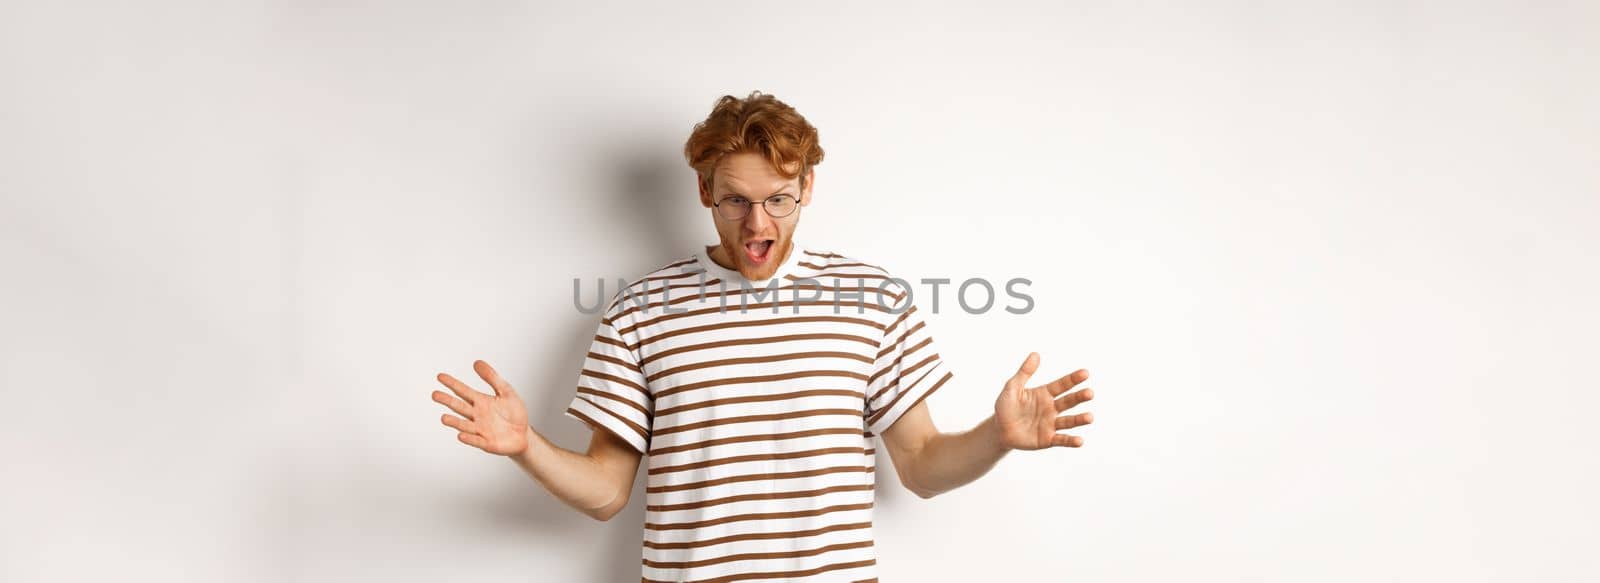 Impressed redhead man in glasses showing length of something big, demonstrate large size and looking amazed, standing over white background.